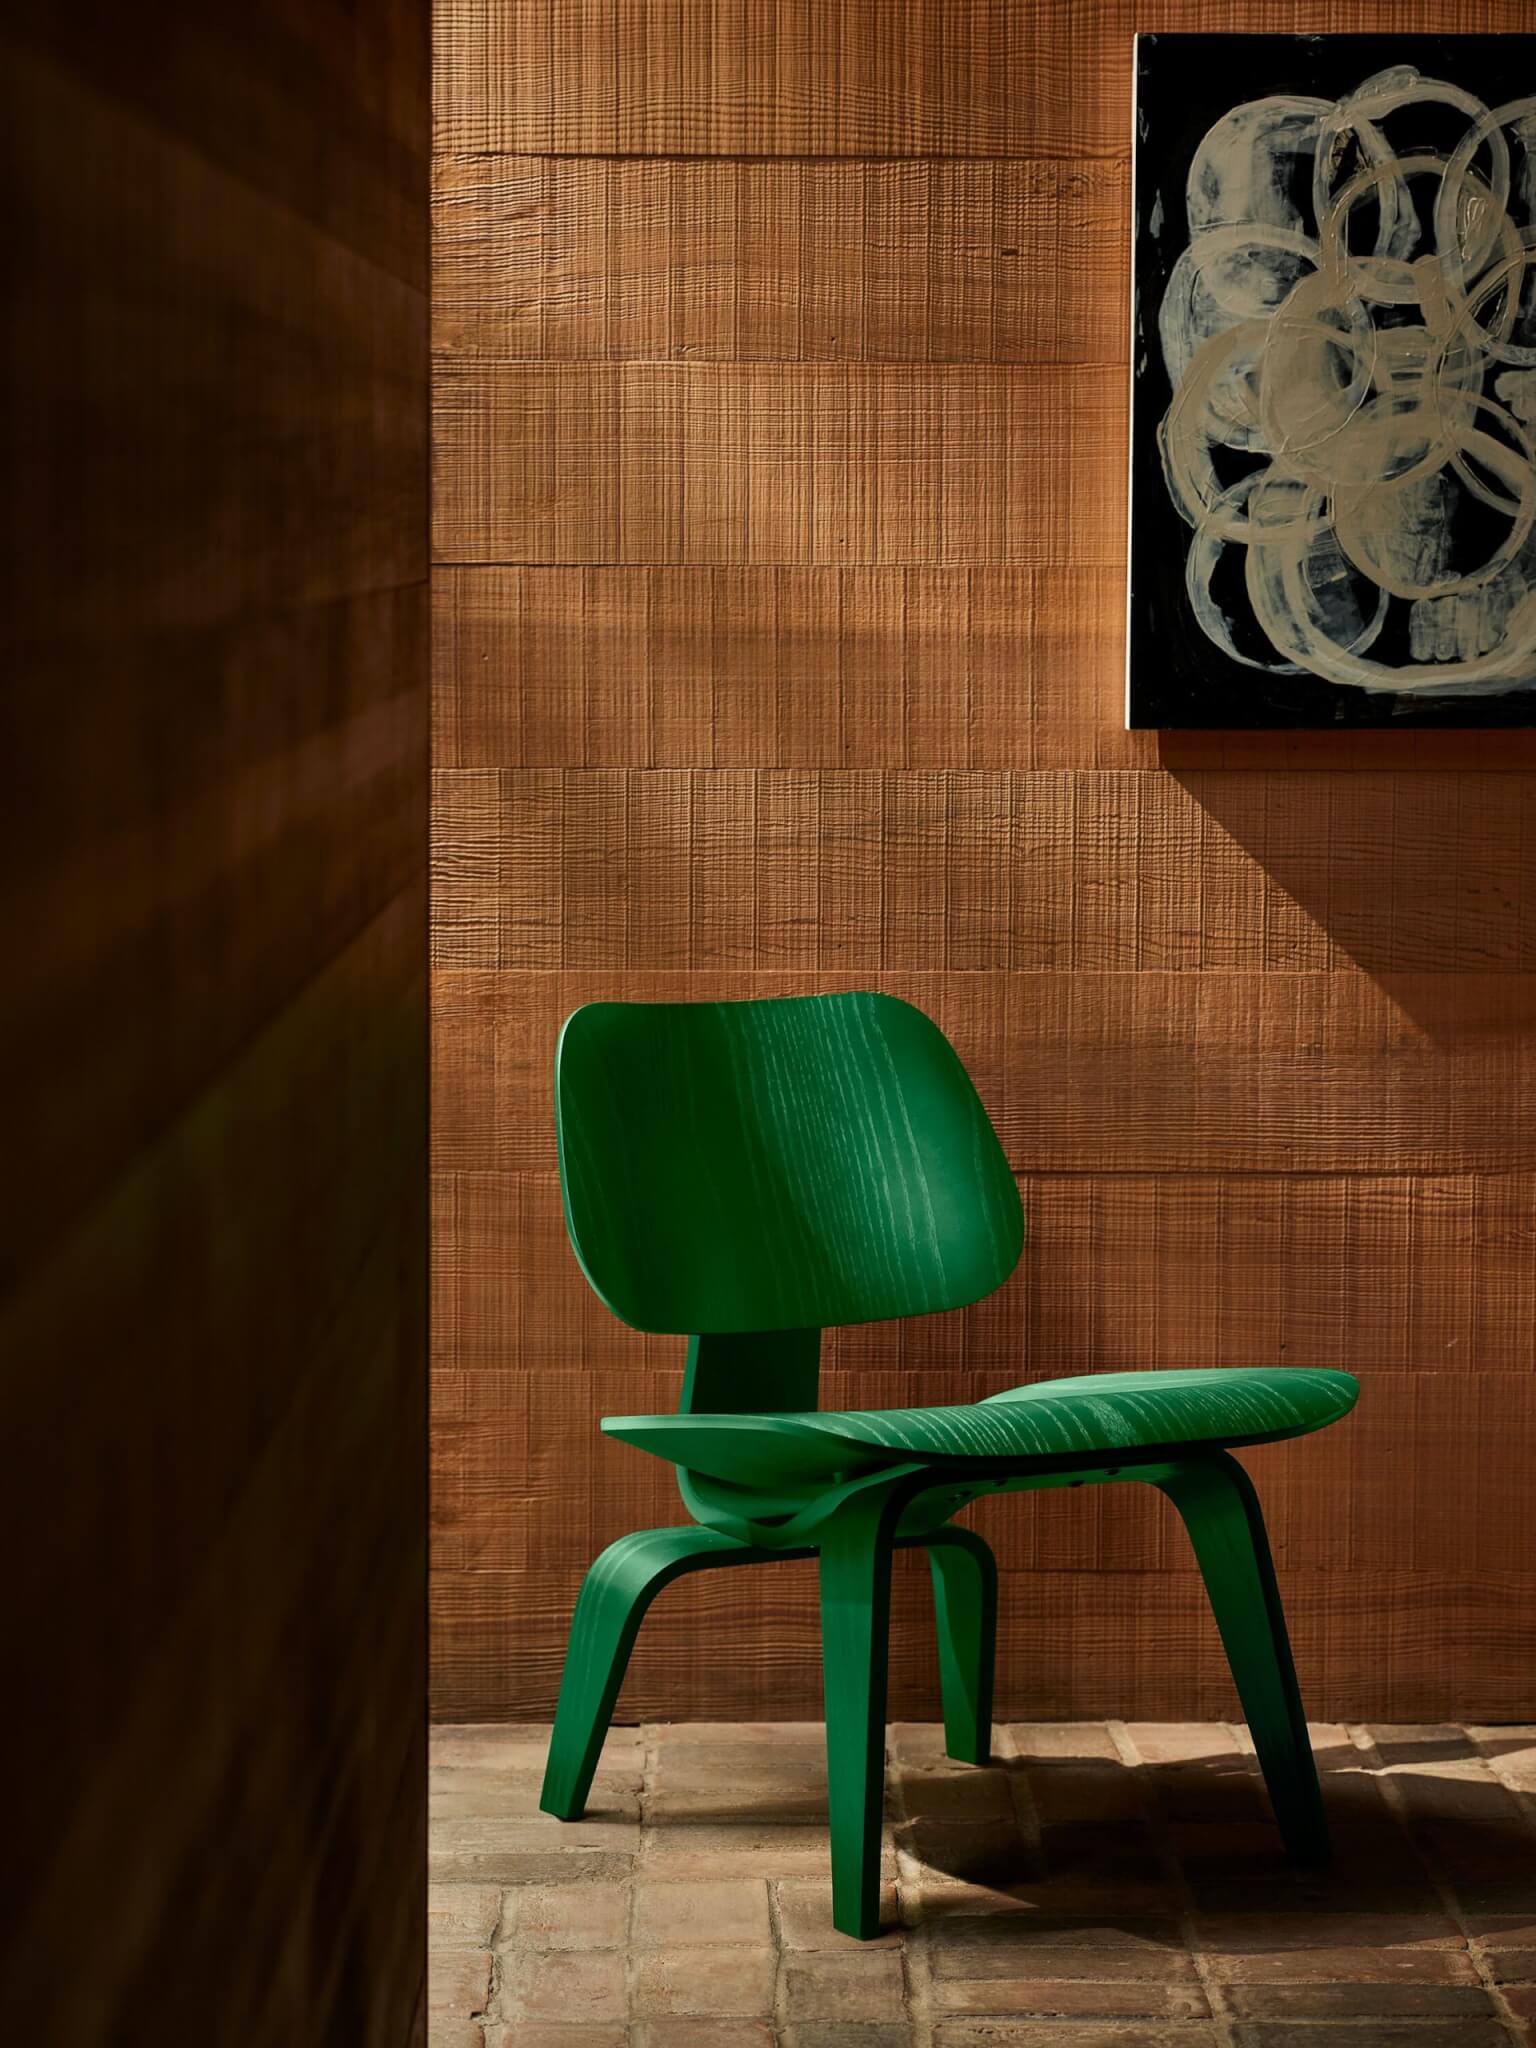 green chair against brown background